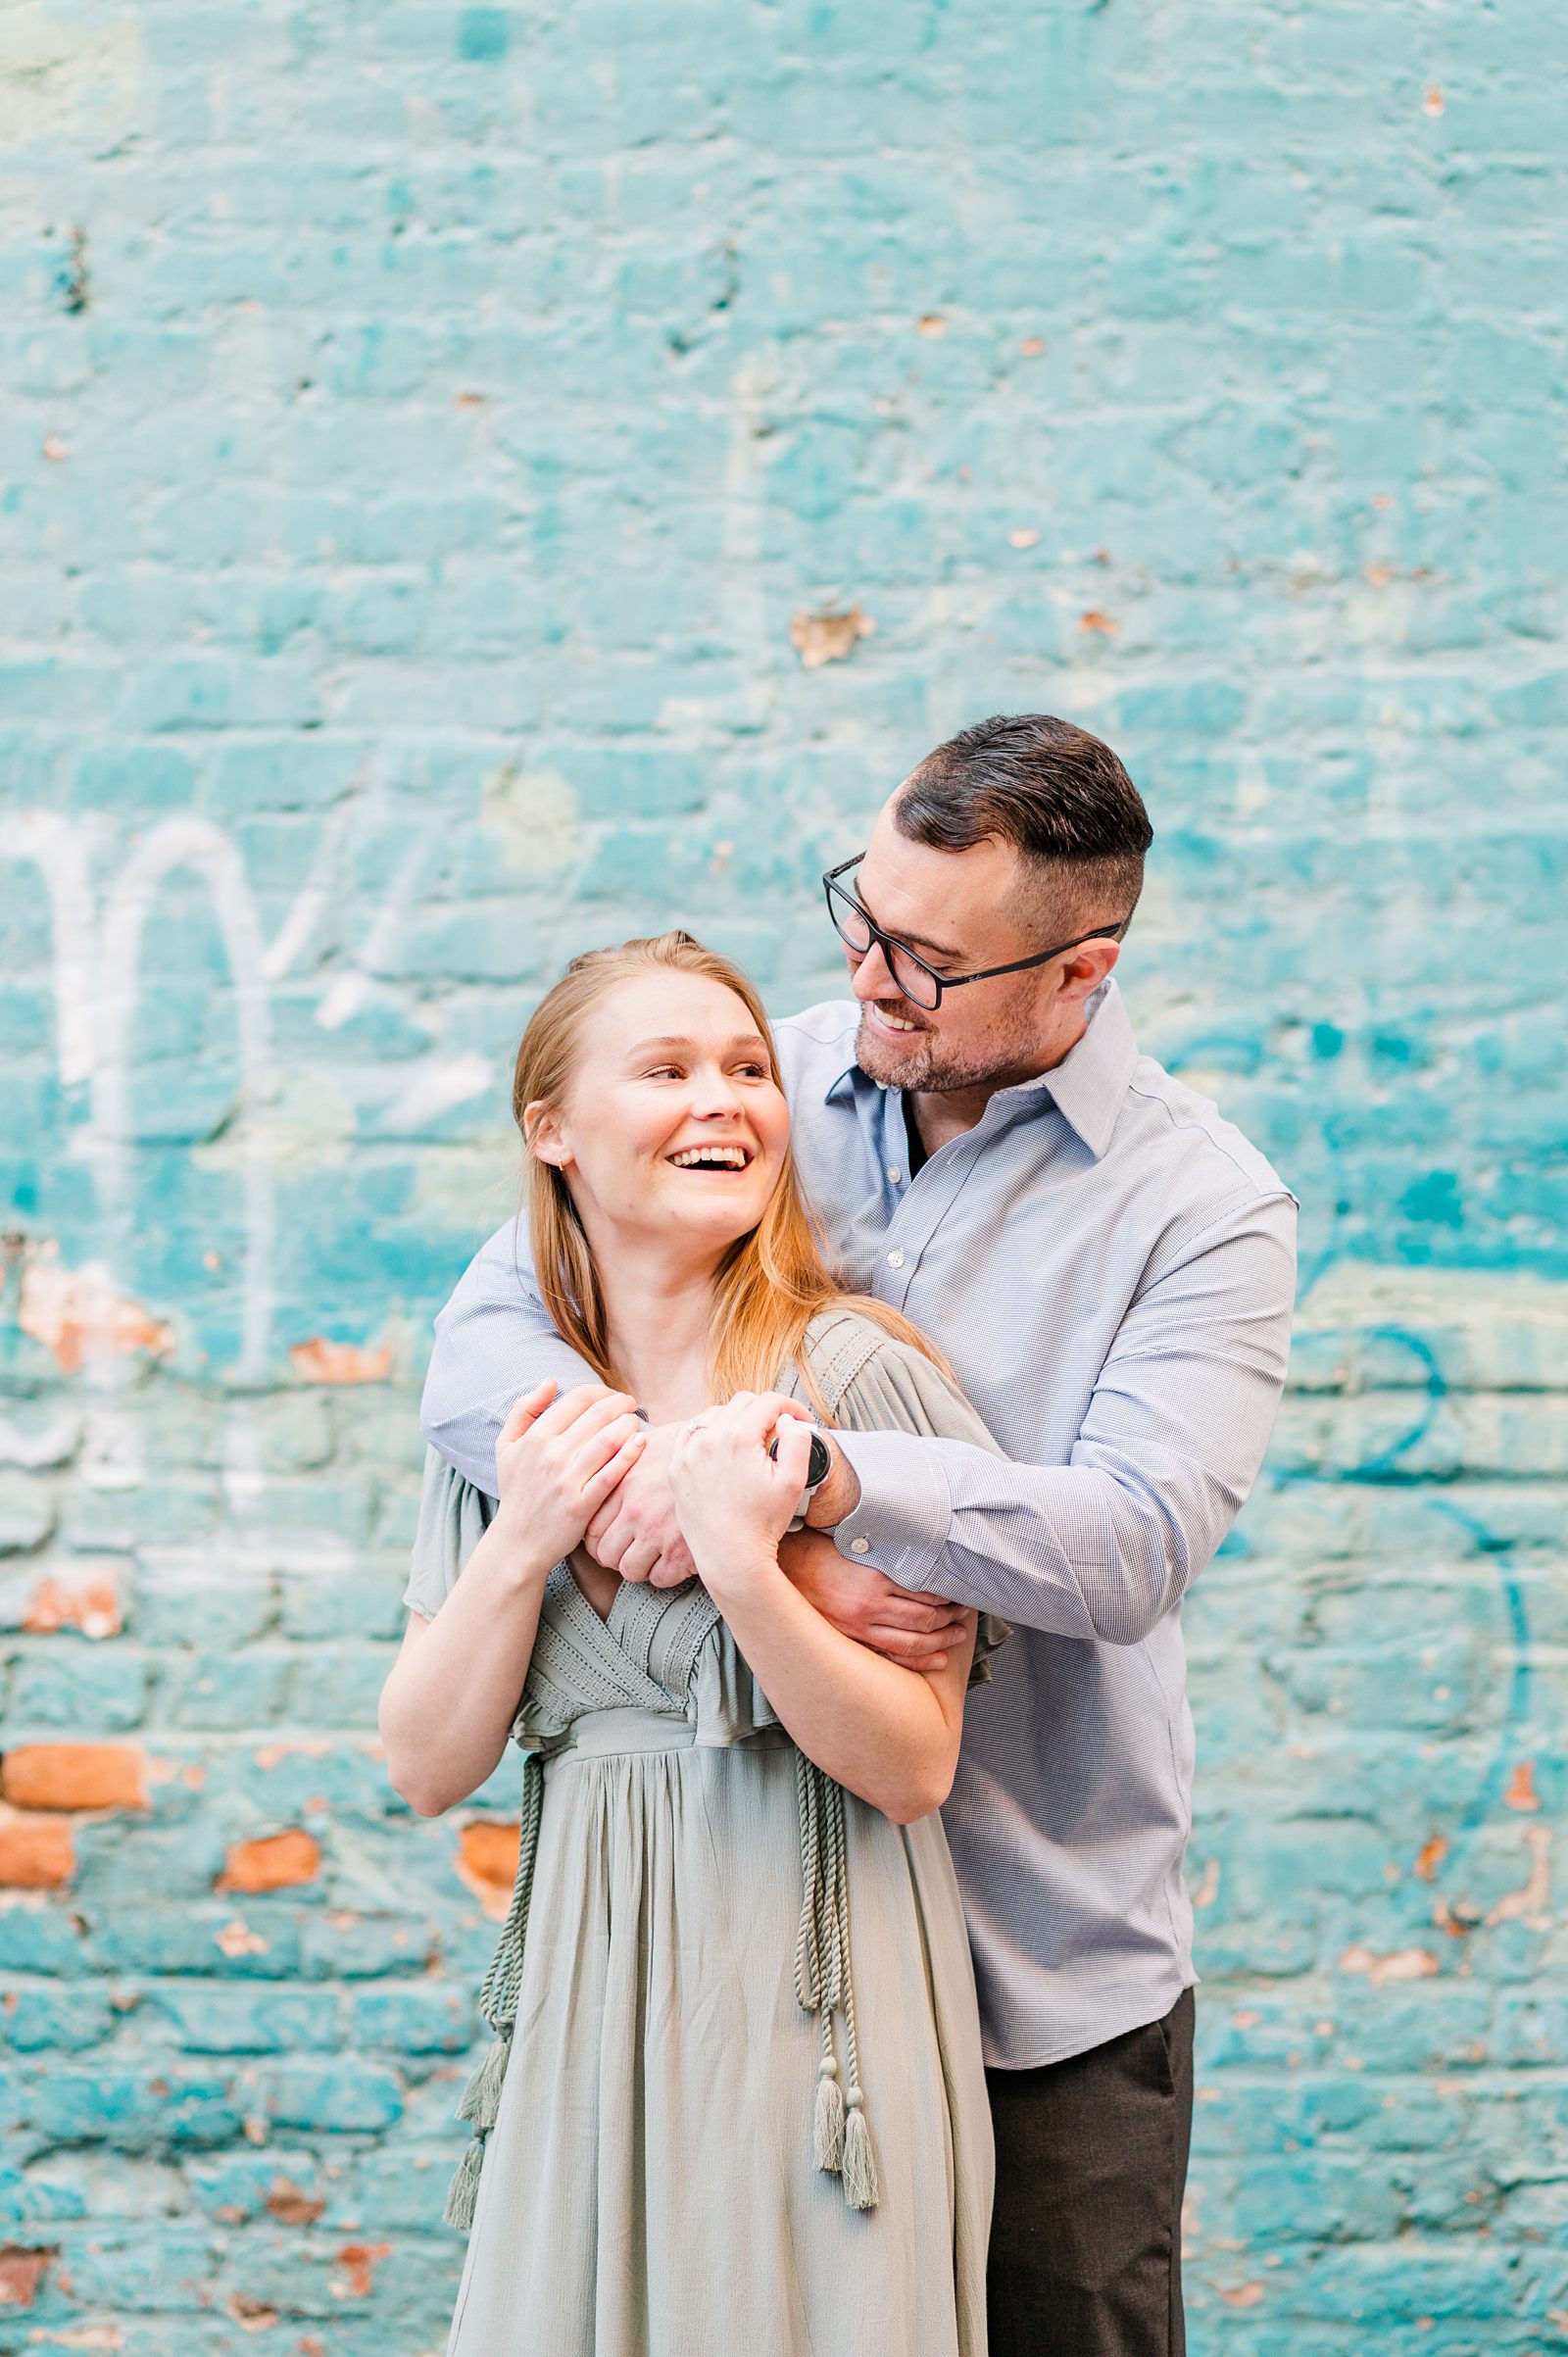 Downtown Richmond Engagement Session with Colorful Blue Wall by Urban Farmhouse. Wedding Photographer Kailey Brianne Photography